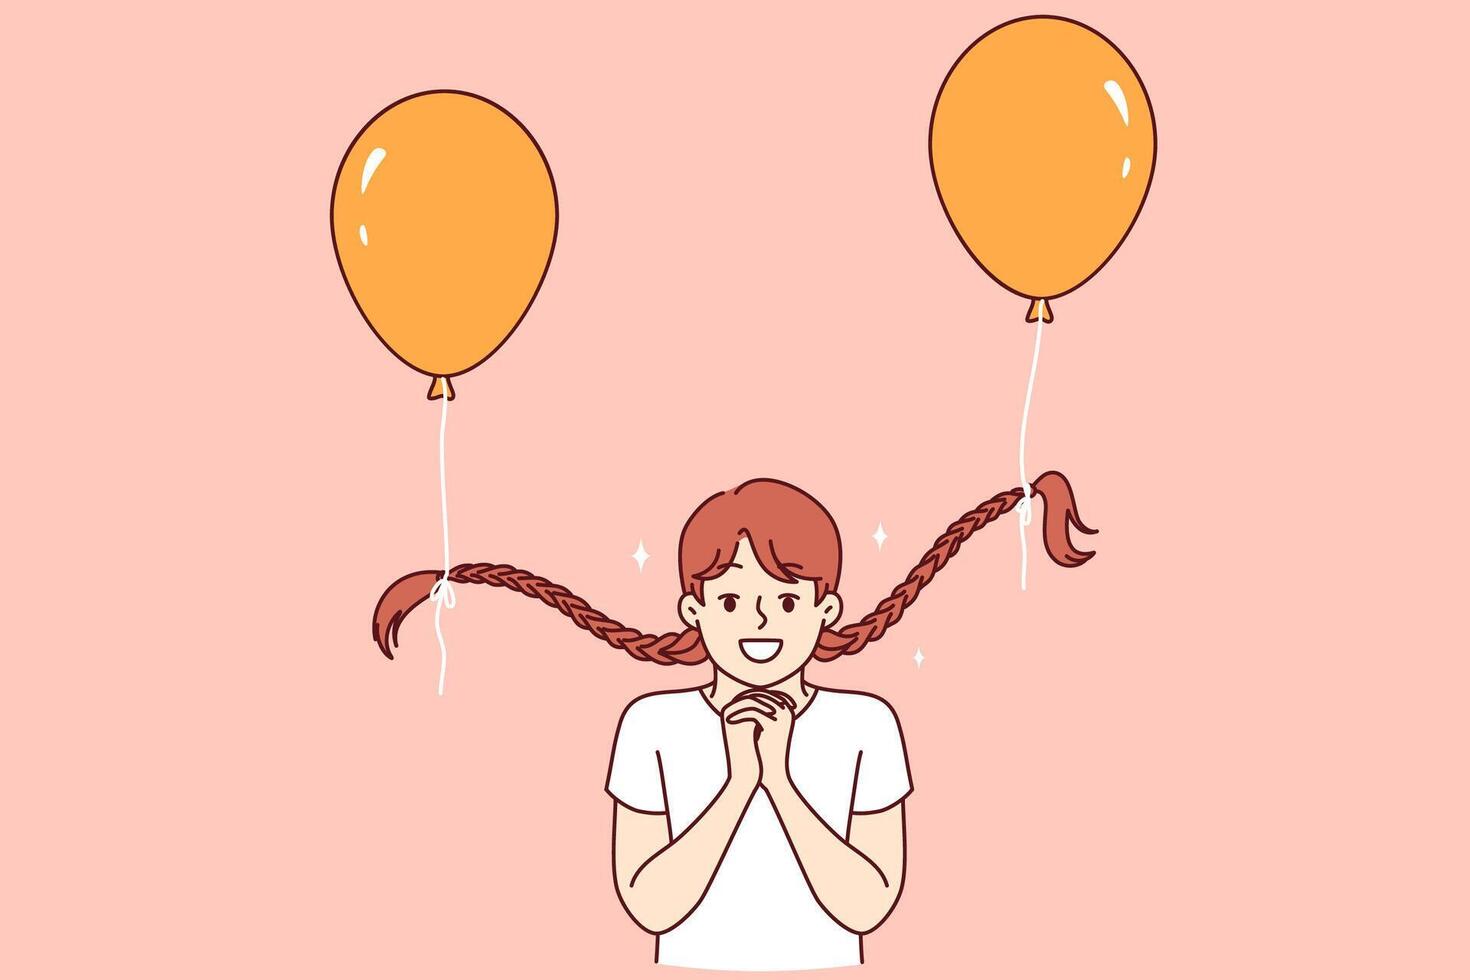 Funny little girl with balloons tied to braids folds palms, making request or showing hope vector